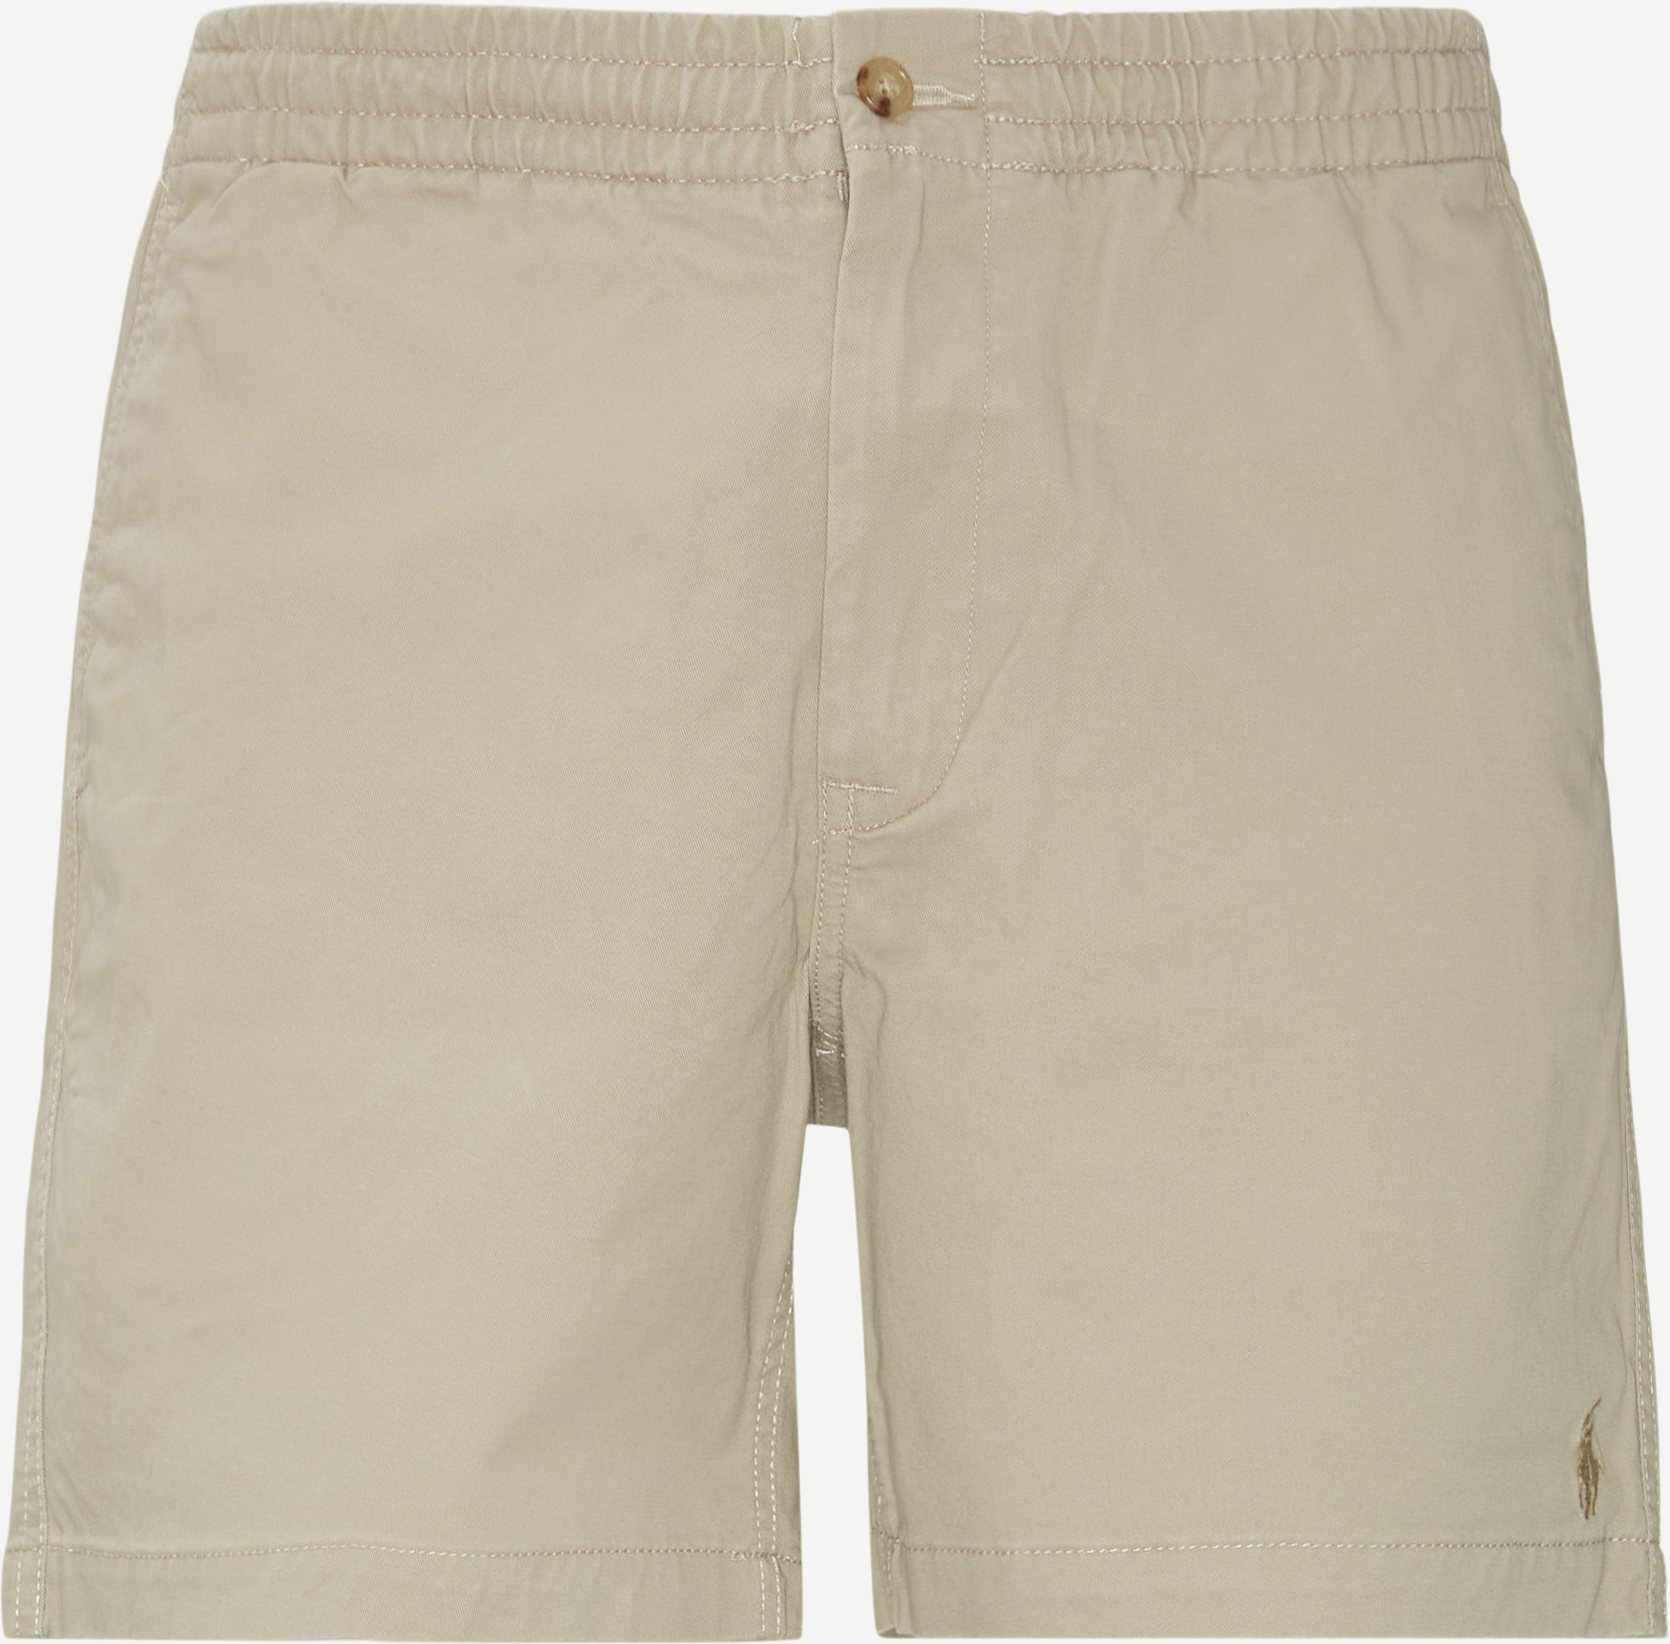 Shorts - Classic fit - Sand